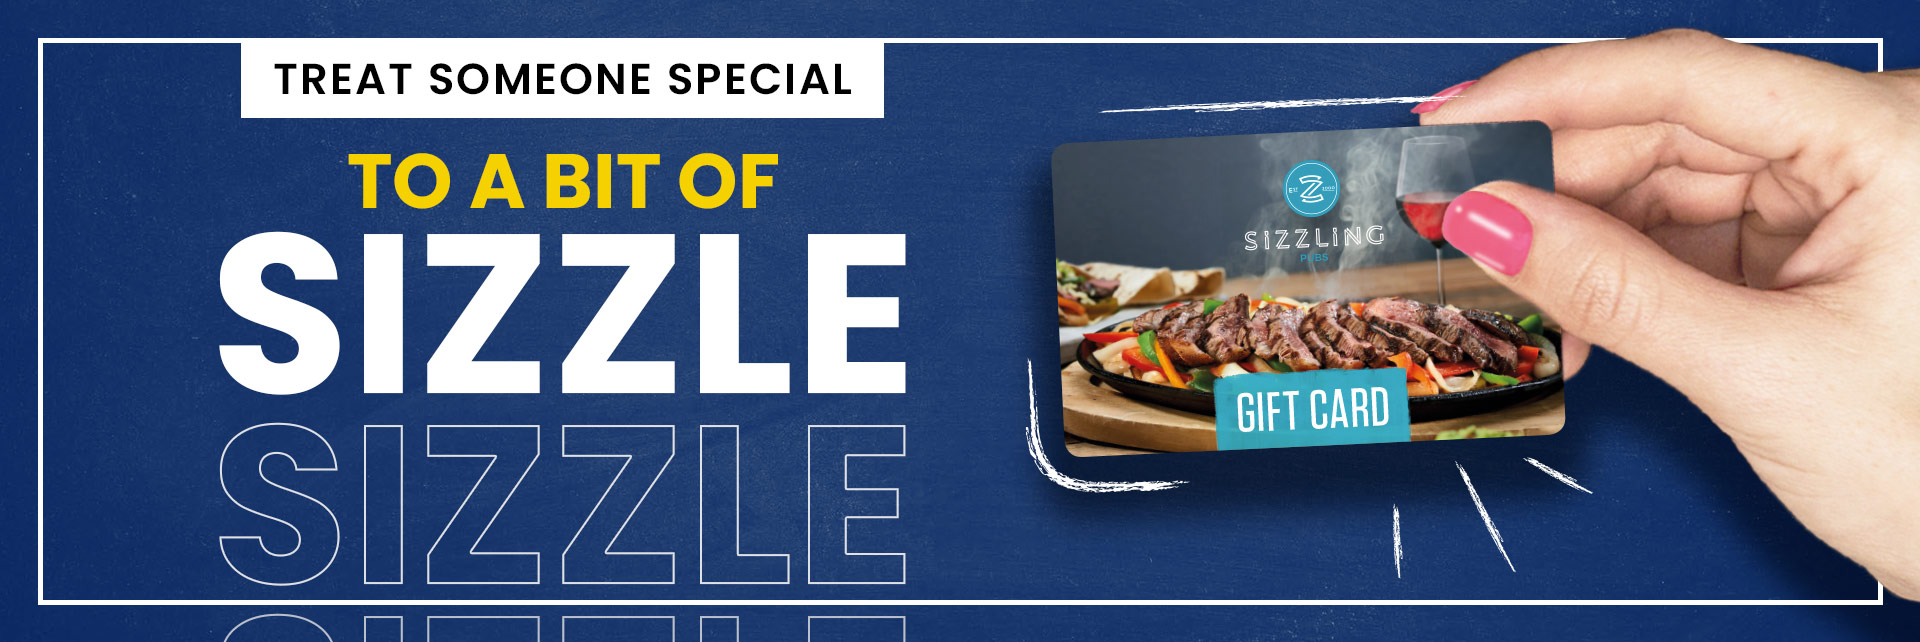 Sizzling Pubs Gift Card at Hare and Hounds, Birmingham in Birmingham